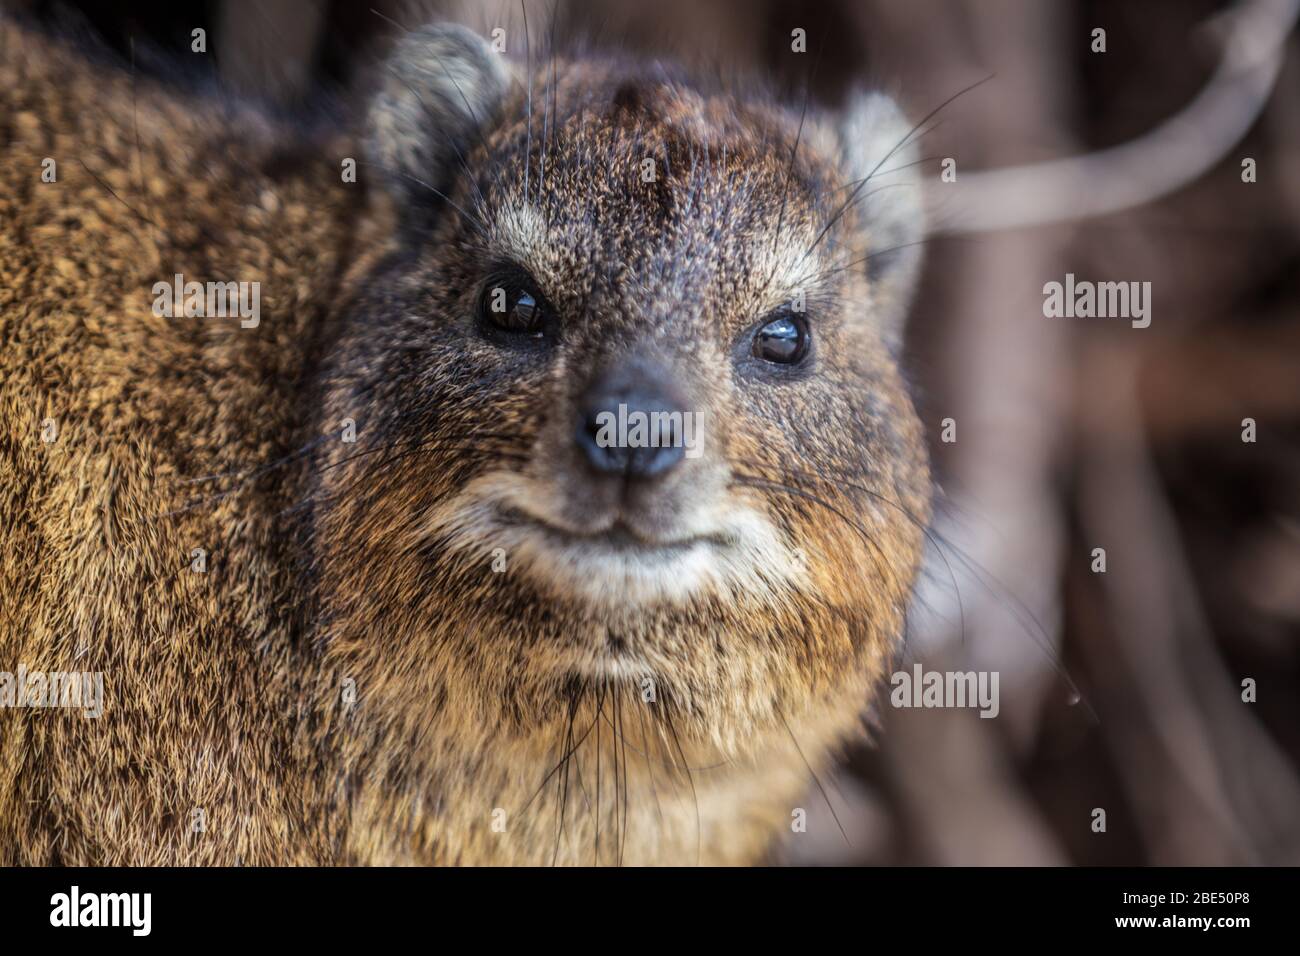 Close-up photo of Hyrax in South Africa Stock Photo